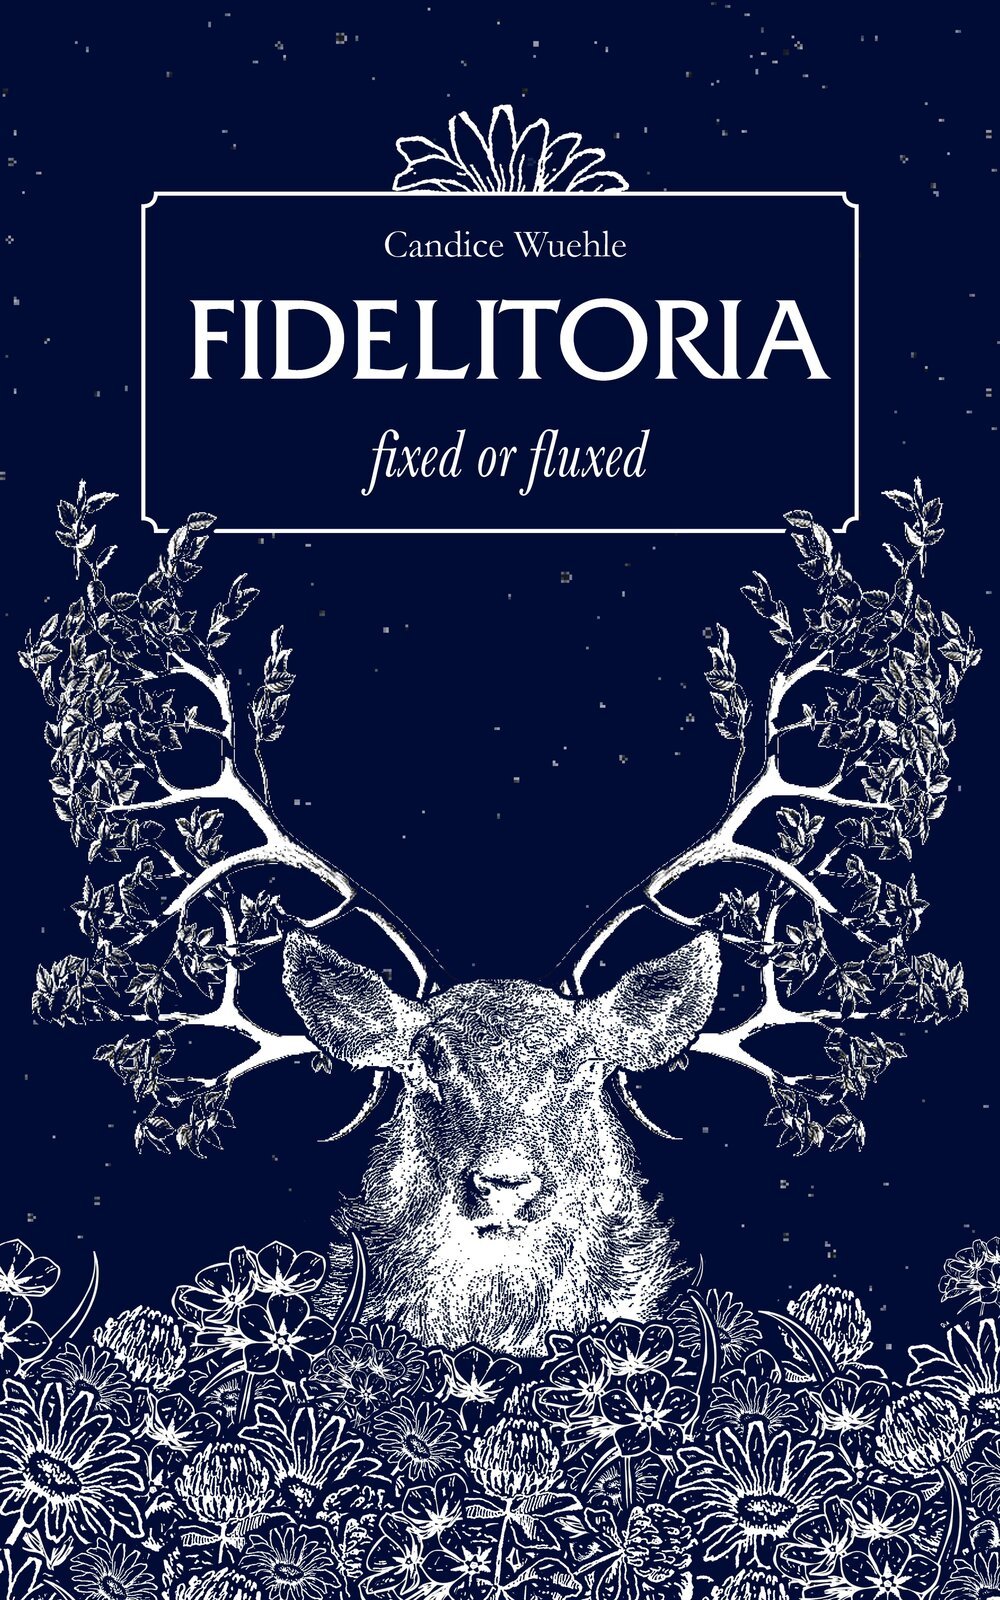 Fidelitoria_Fixed or Fluxed_Candice Wuehle FRONT COVER.jpg